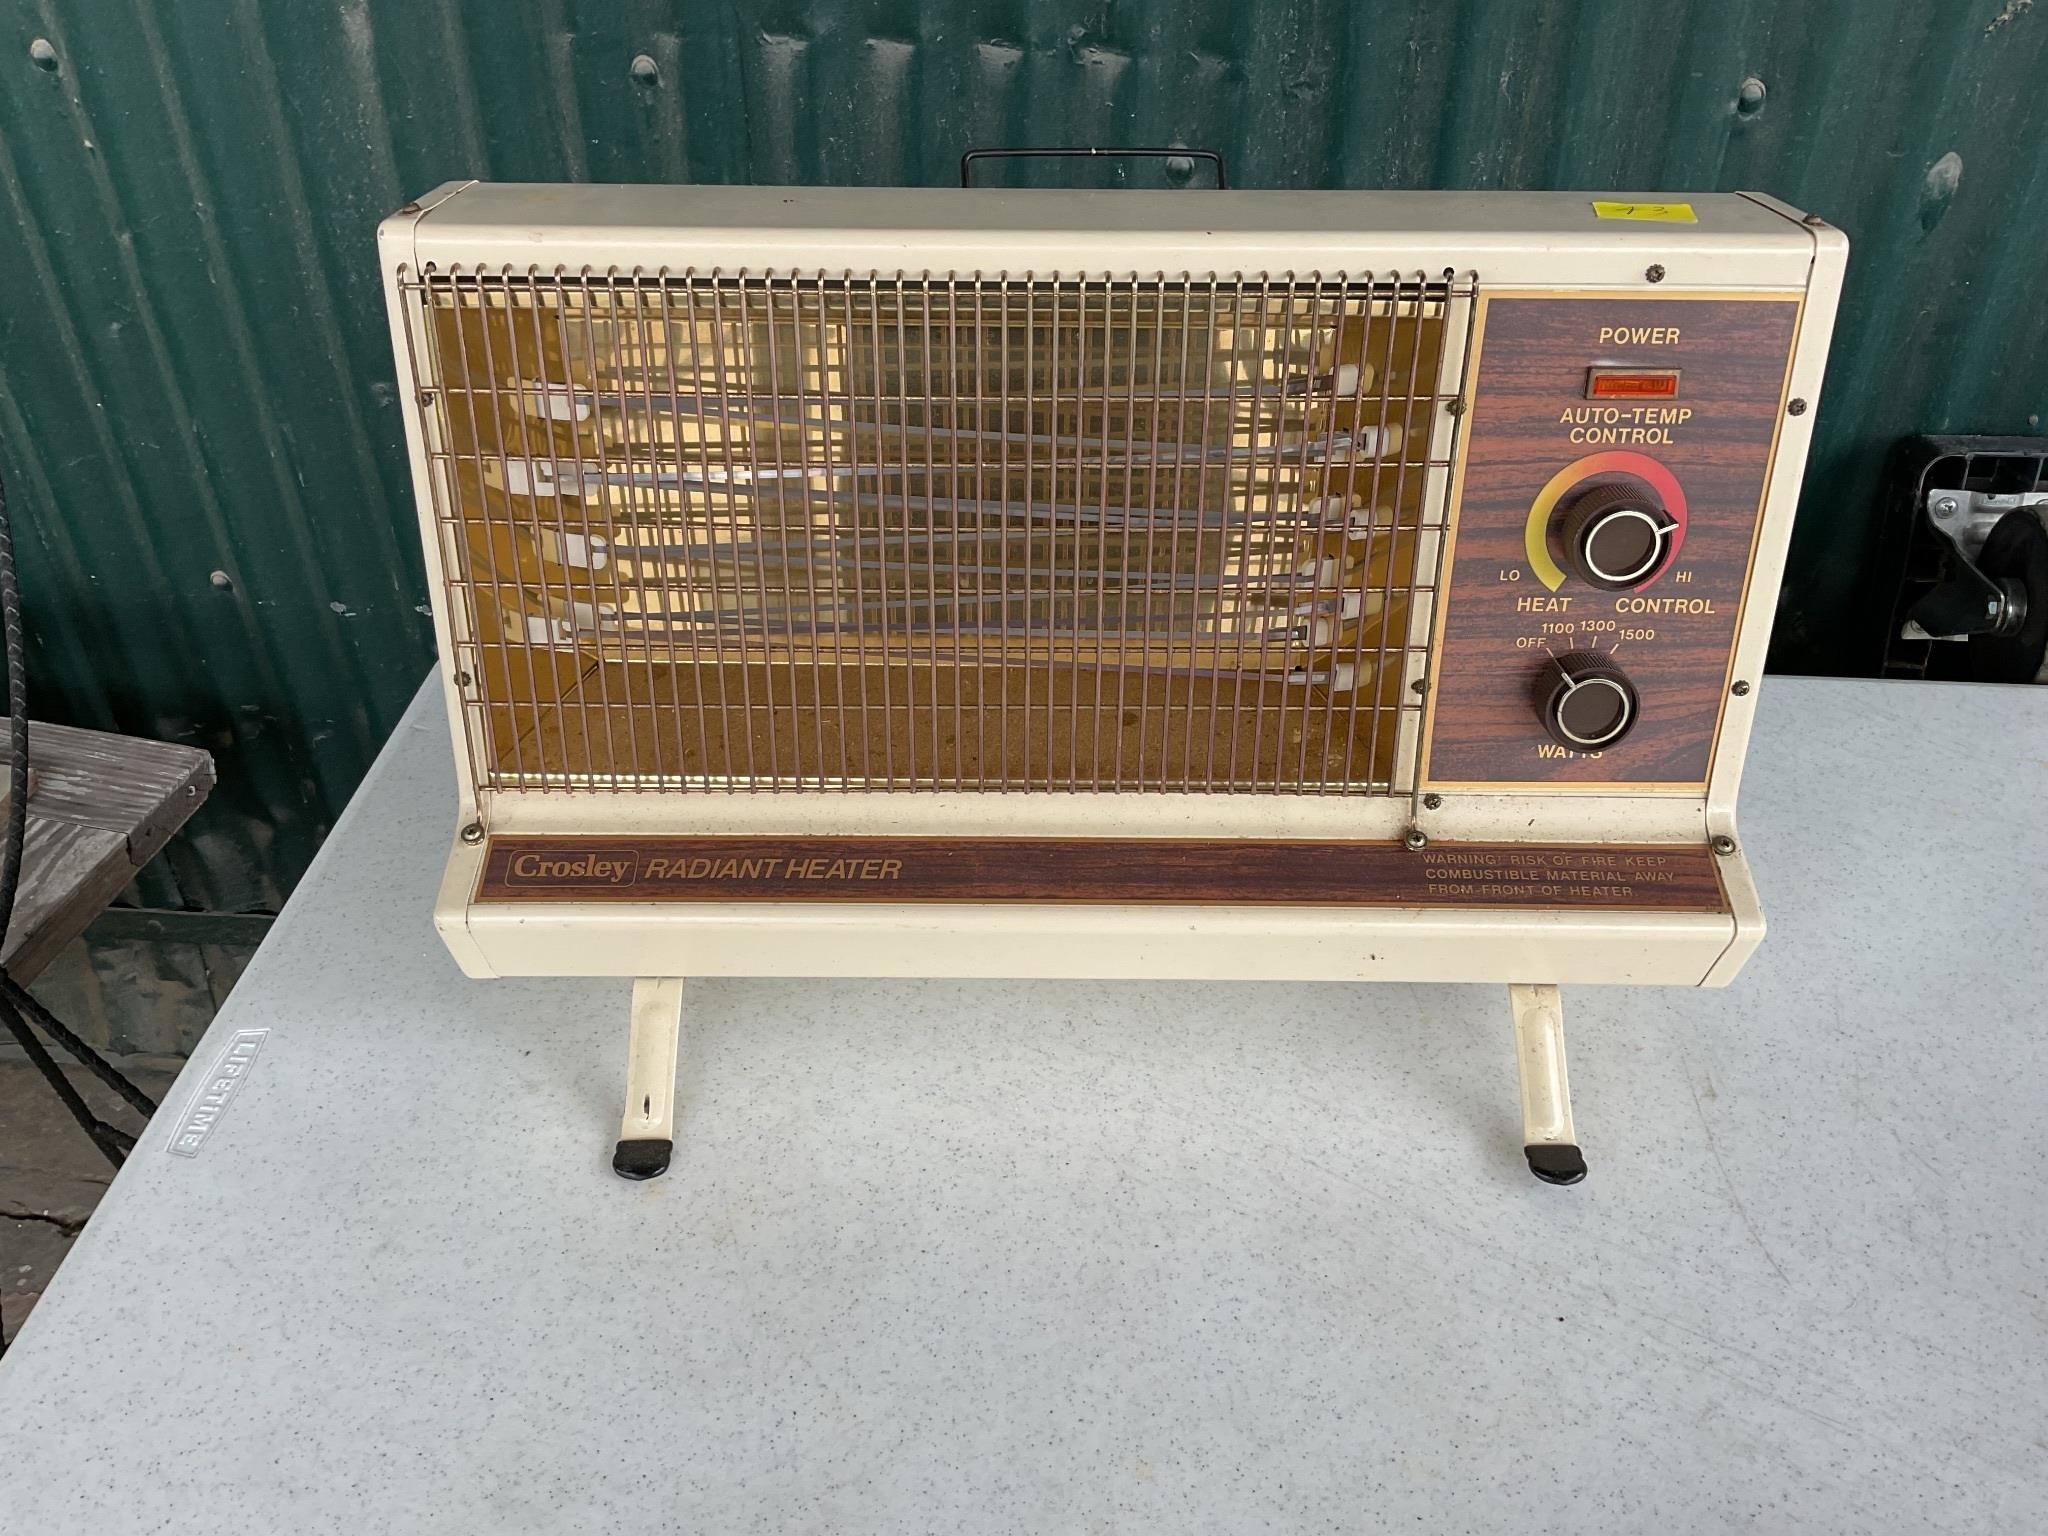 Electric heater 21 inches long 13 inches tall